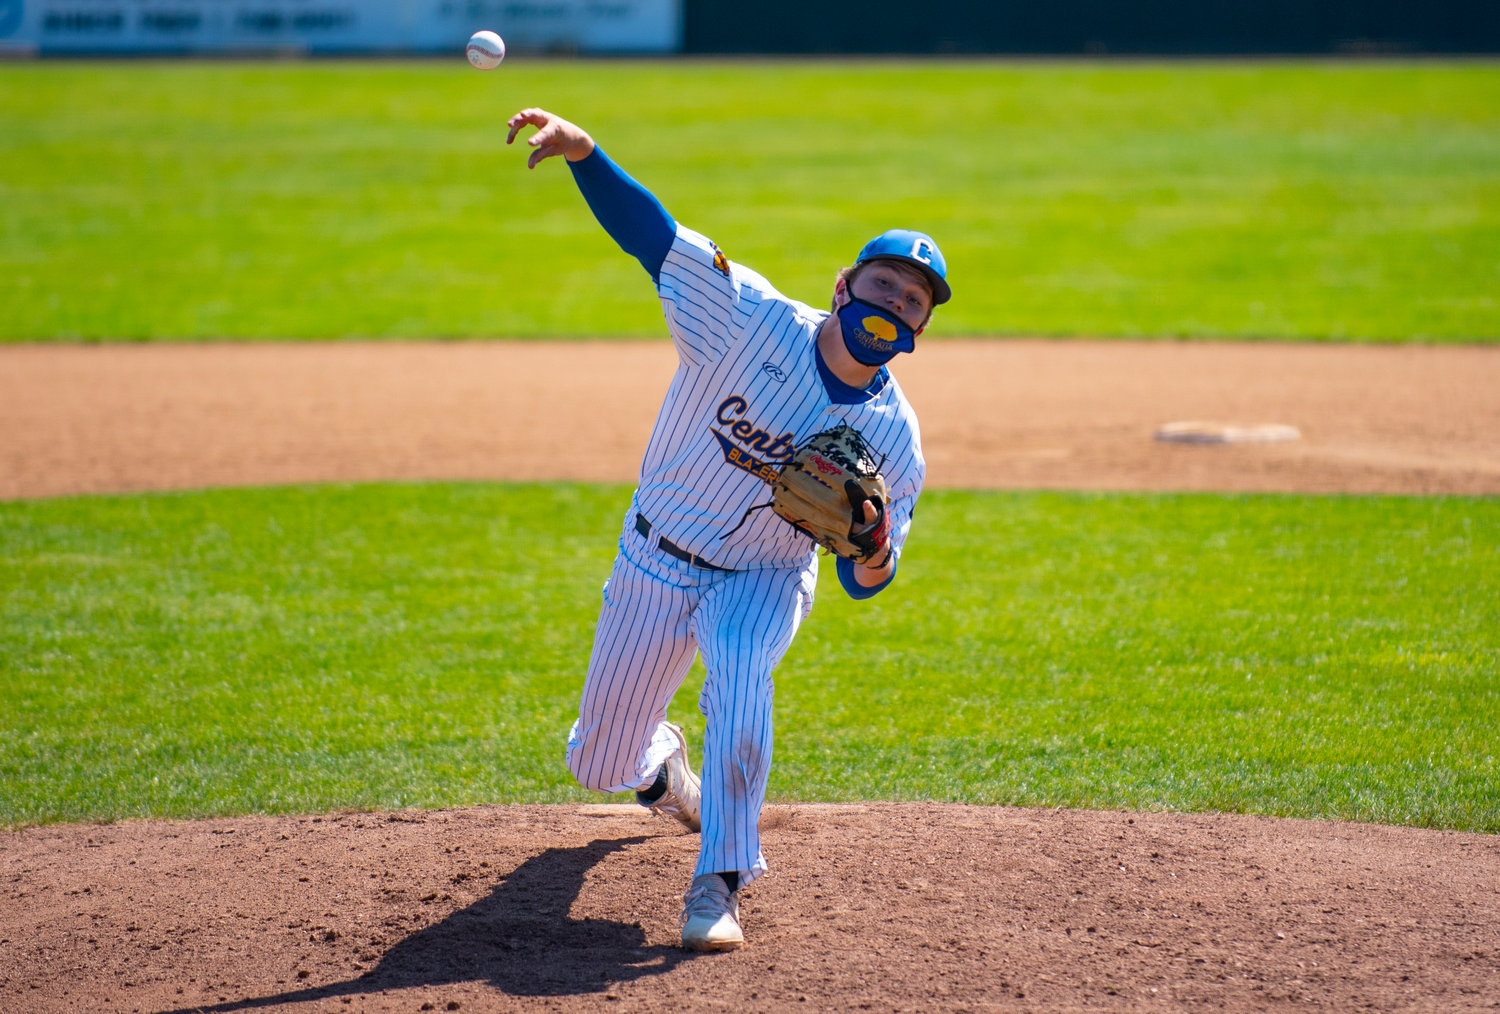 Centralia College pitcher Derek Beairsto delivers a pitch to a Pierce College batter on Saturday at Wheeler Field in Centralia.